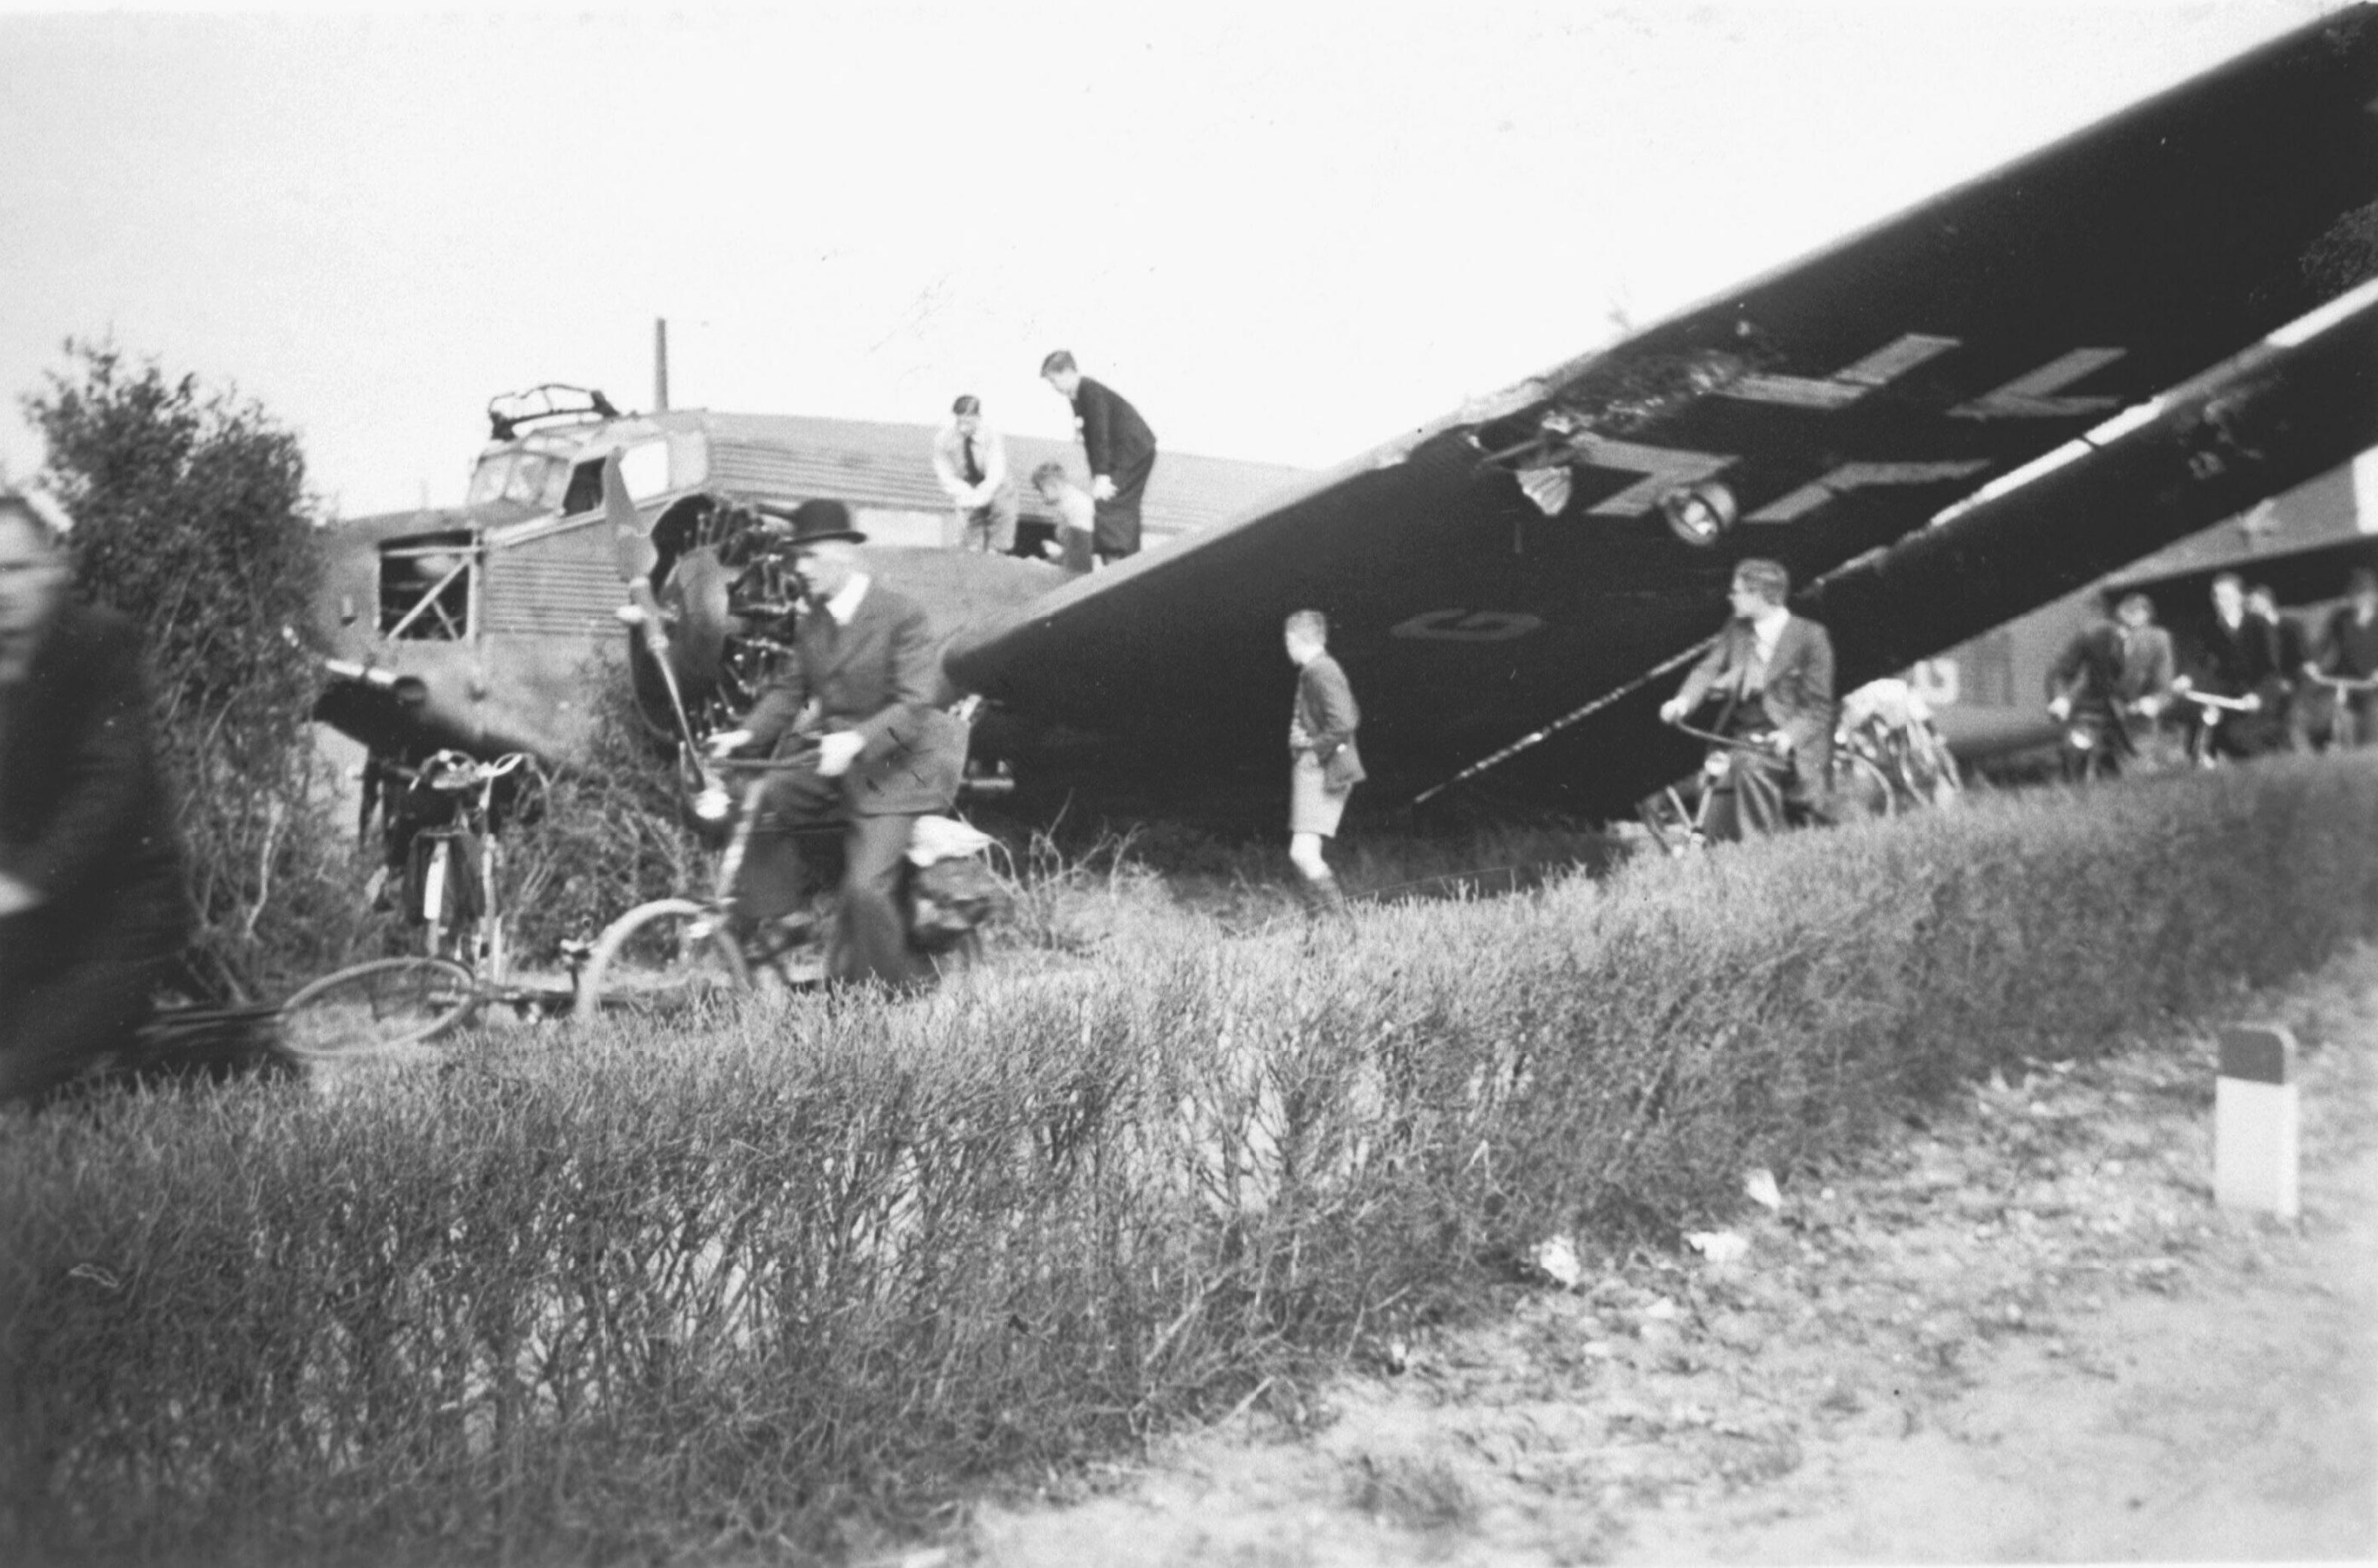 Junkers Ju 52 3m KGrzbV 9 KGrzbV 40 KGrzbV 50 KGrzbV 60 9P+GM shot down over Holland May 1940 NIOD2